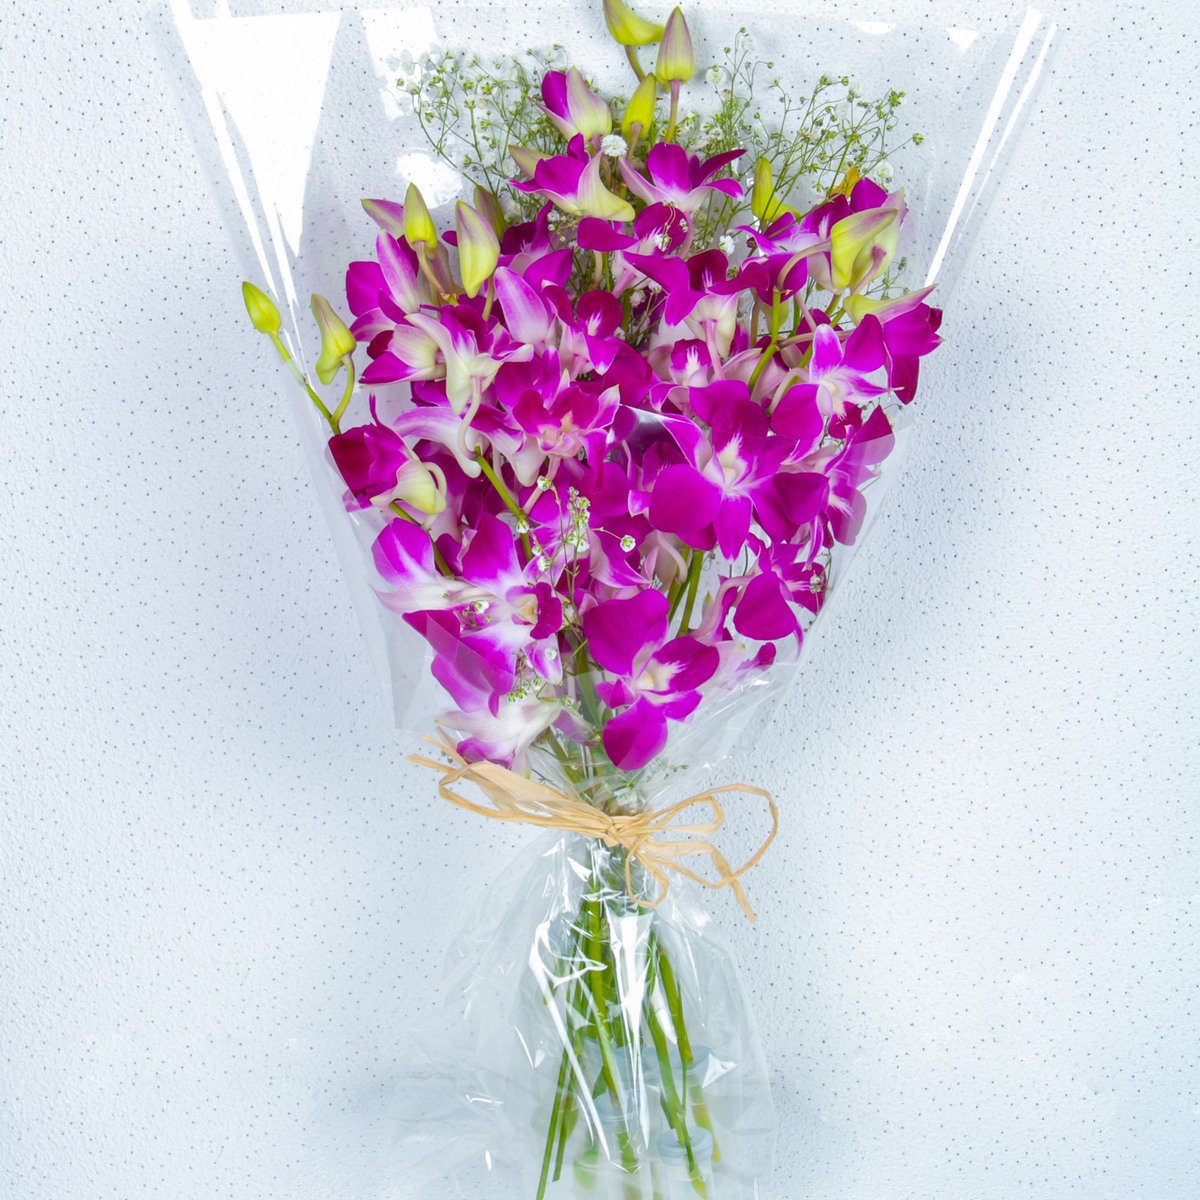 Double Colour Dendrobium Orchids Bunch with Baby Breath